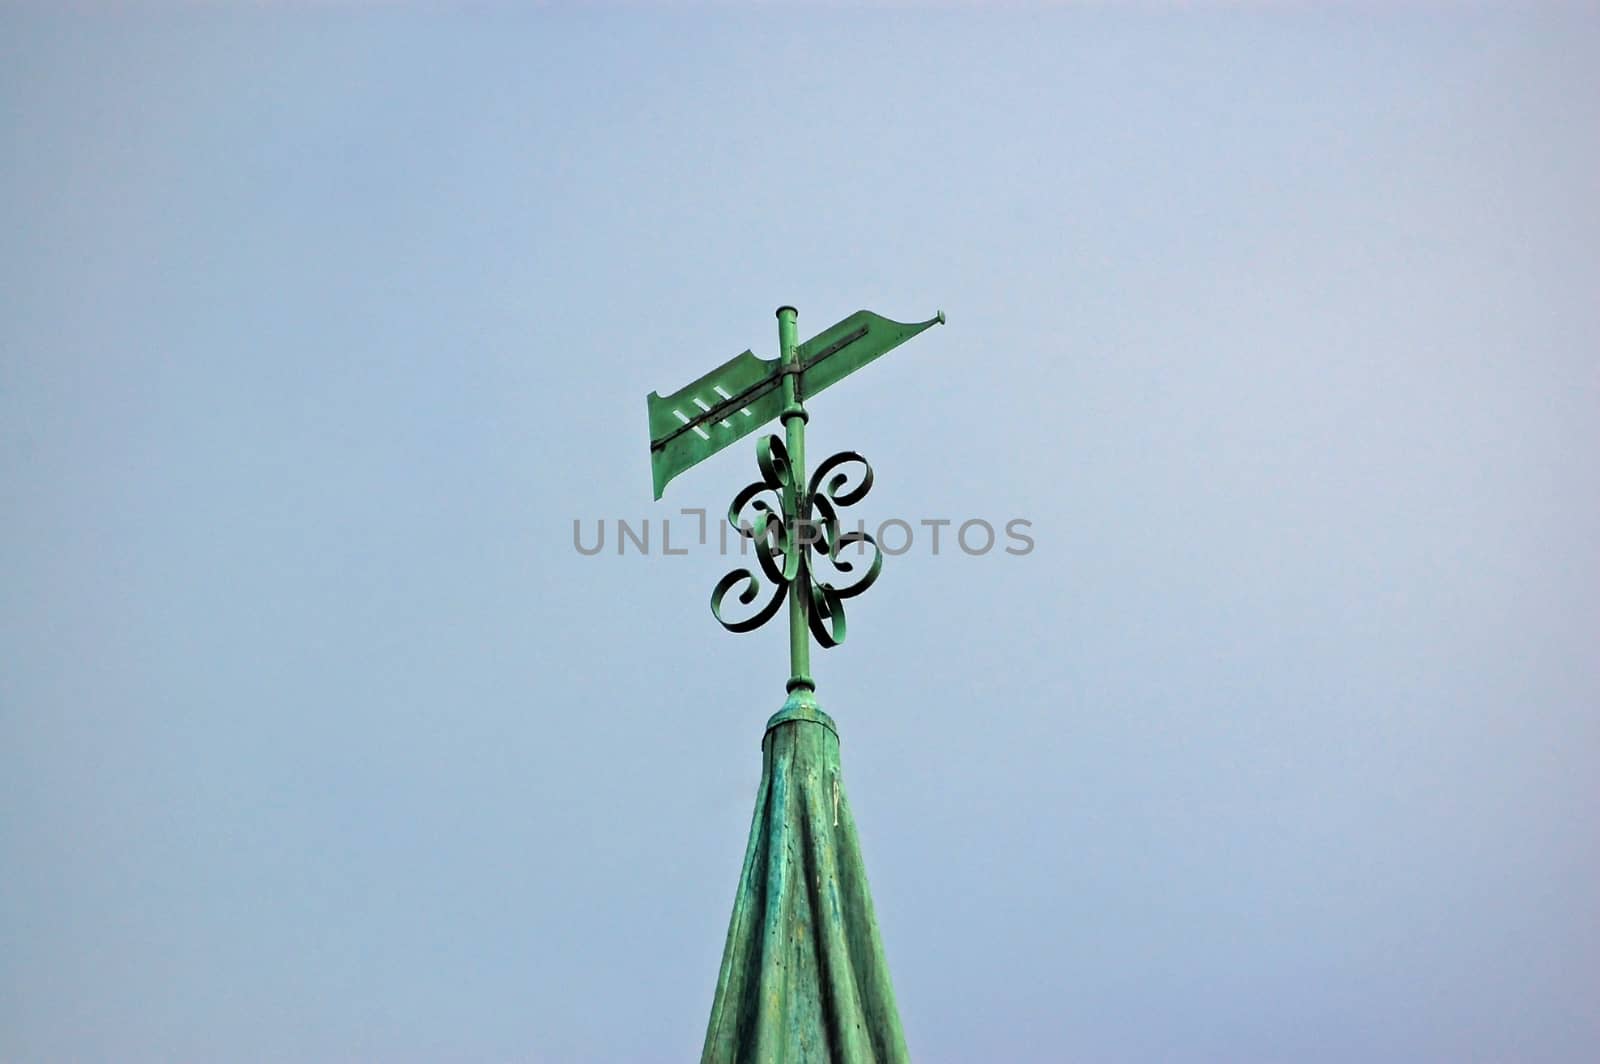 Weathervane in the form of a pen nib atop the spire of Saint Nicholas Church in Steventon, Basingstoke, Hampshire.  The literary giant Jane Austen's father was Rector at St Nicholas and she wrote Pride & Prejudice, Sense & Sensibility and Northanger Abbey while living in the village.  The weather vane marks her residency here.